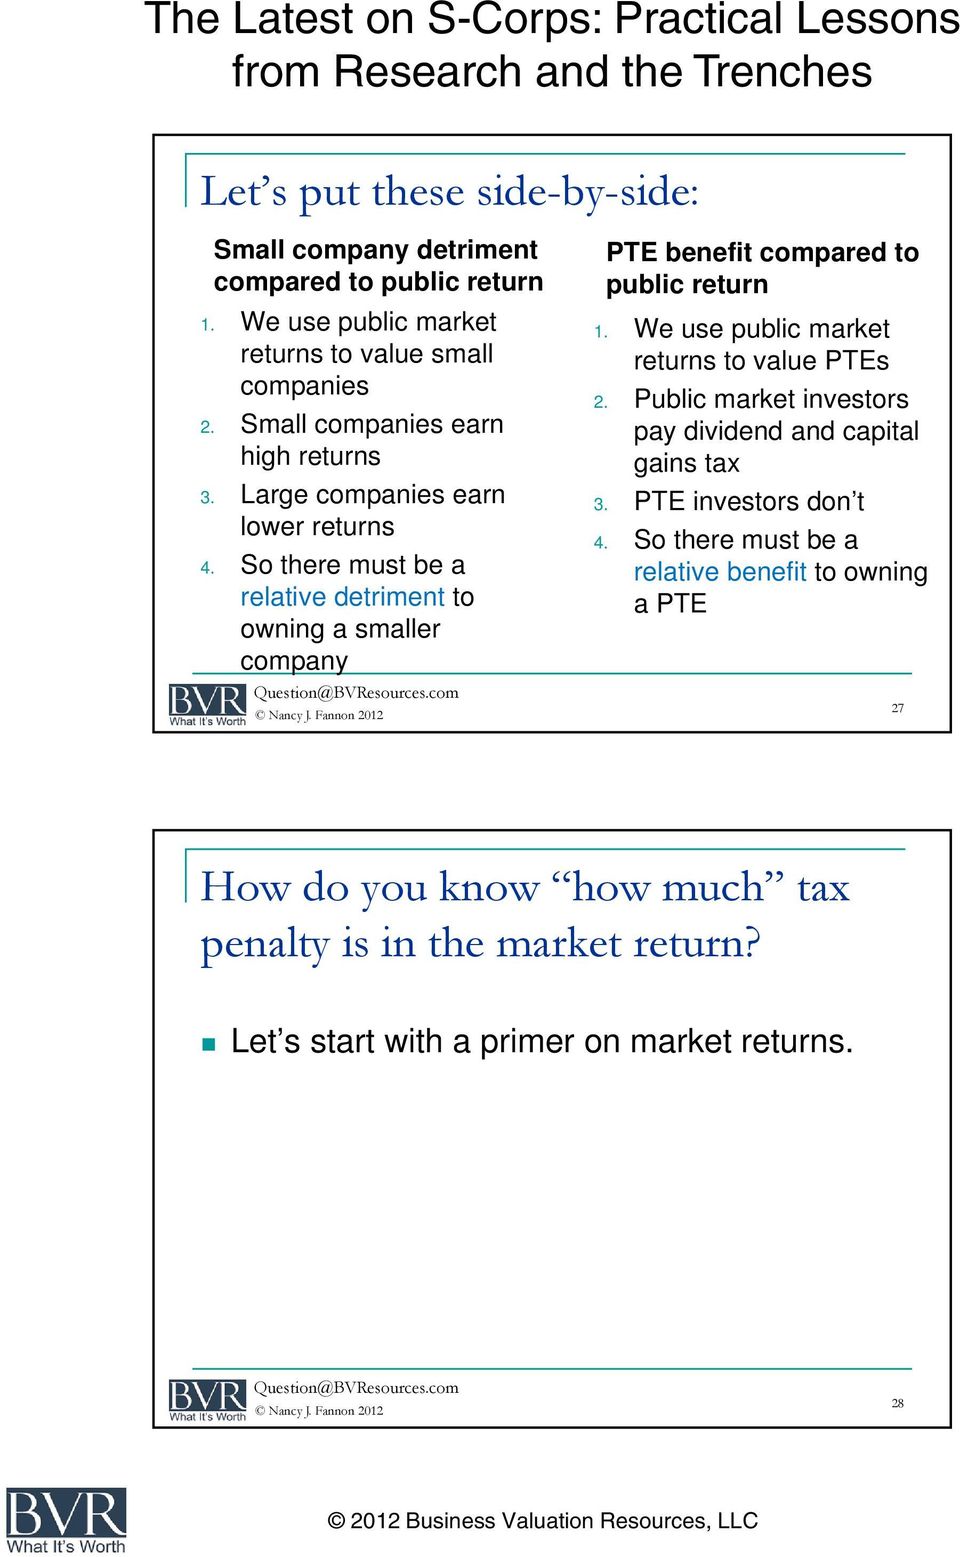 So there must be a relative detriment to owning a smaller company PTE benefit compared to public return 1. We use public market returns to value PTEs 2.